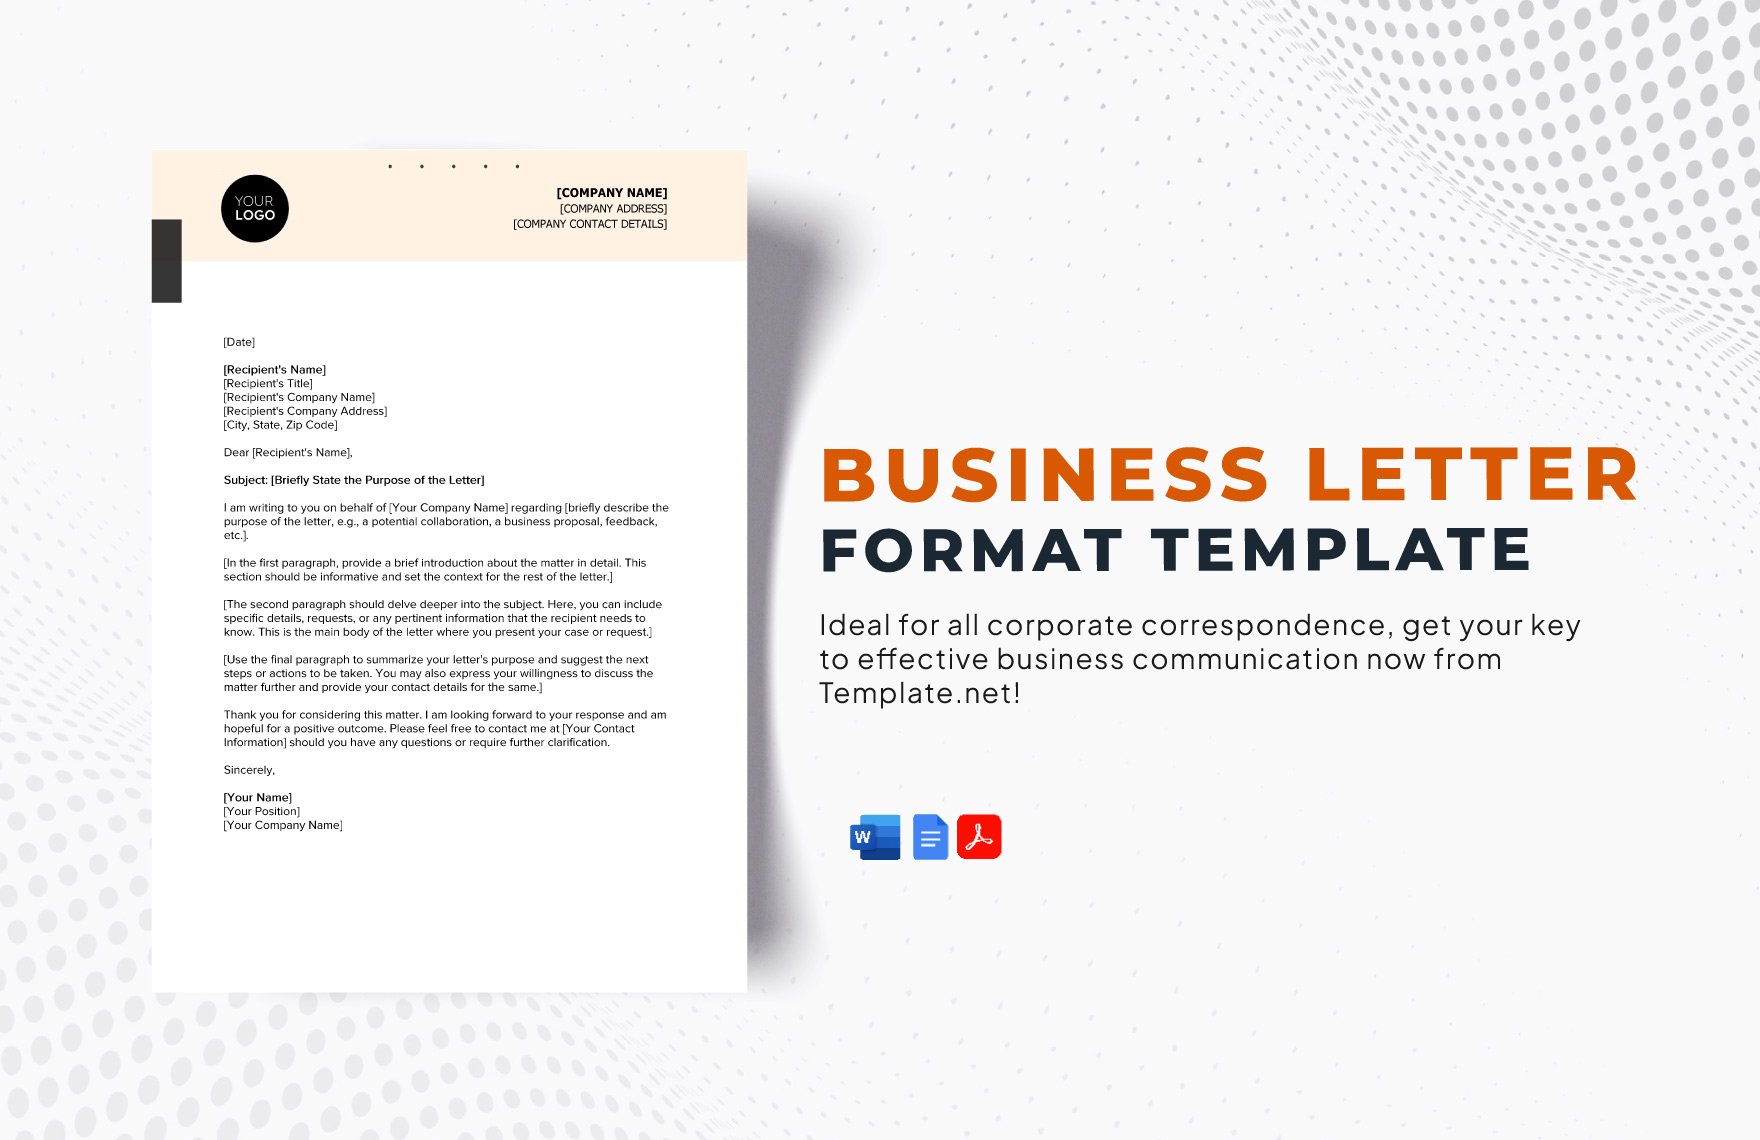 Business Letter Format Template